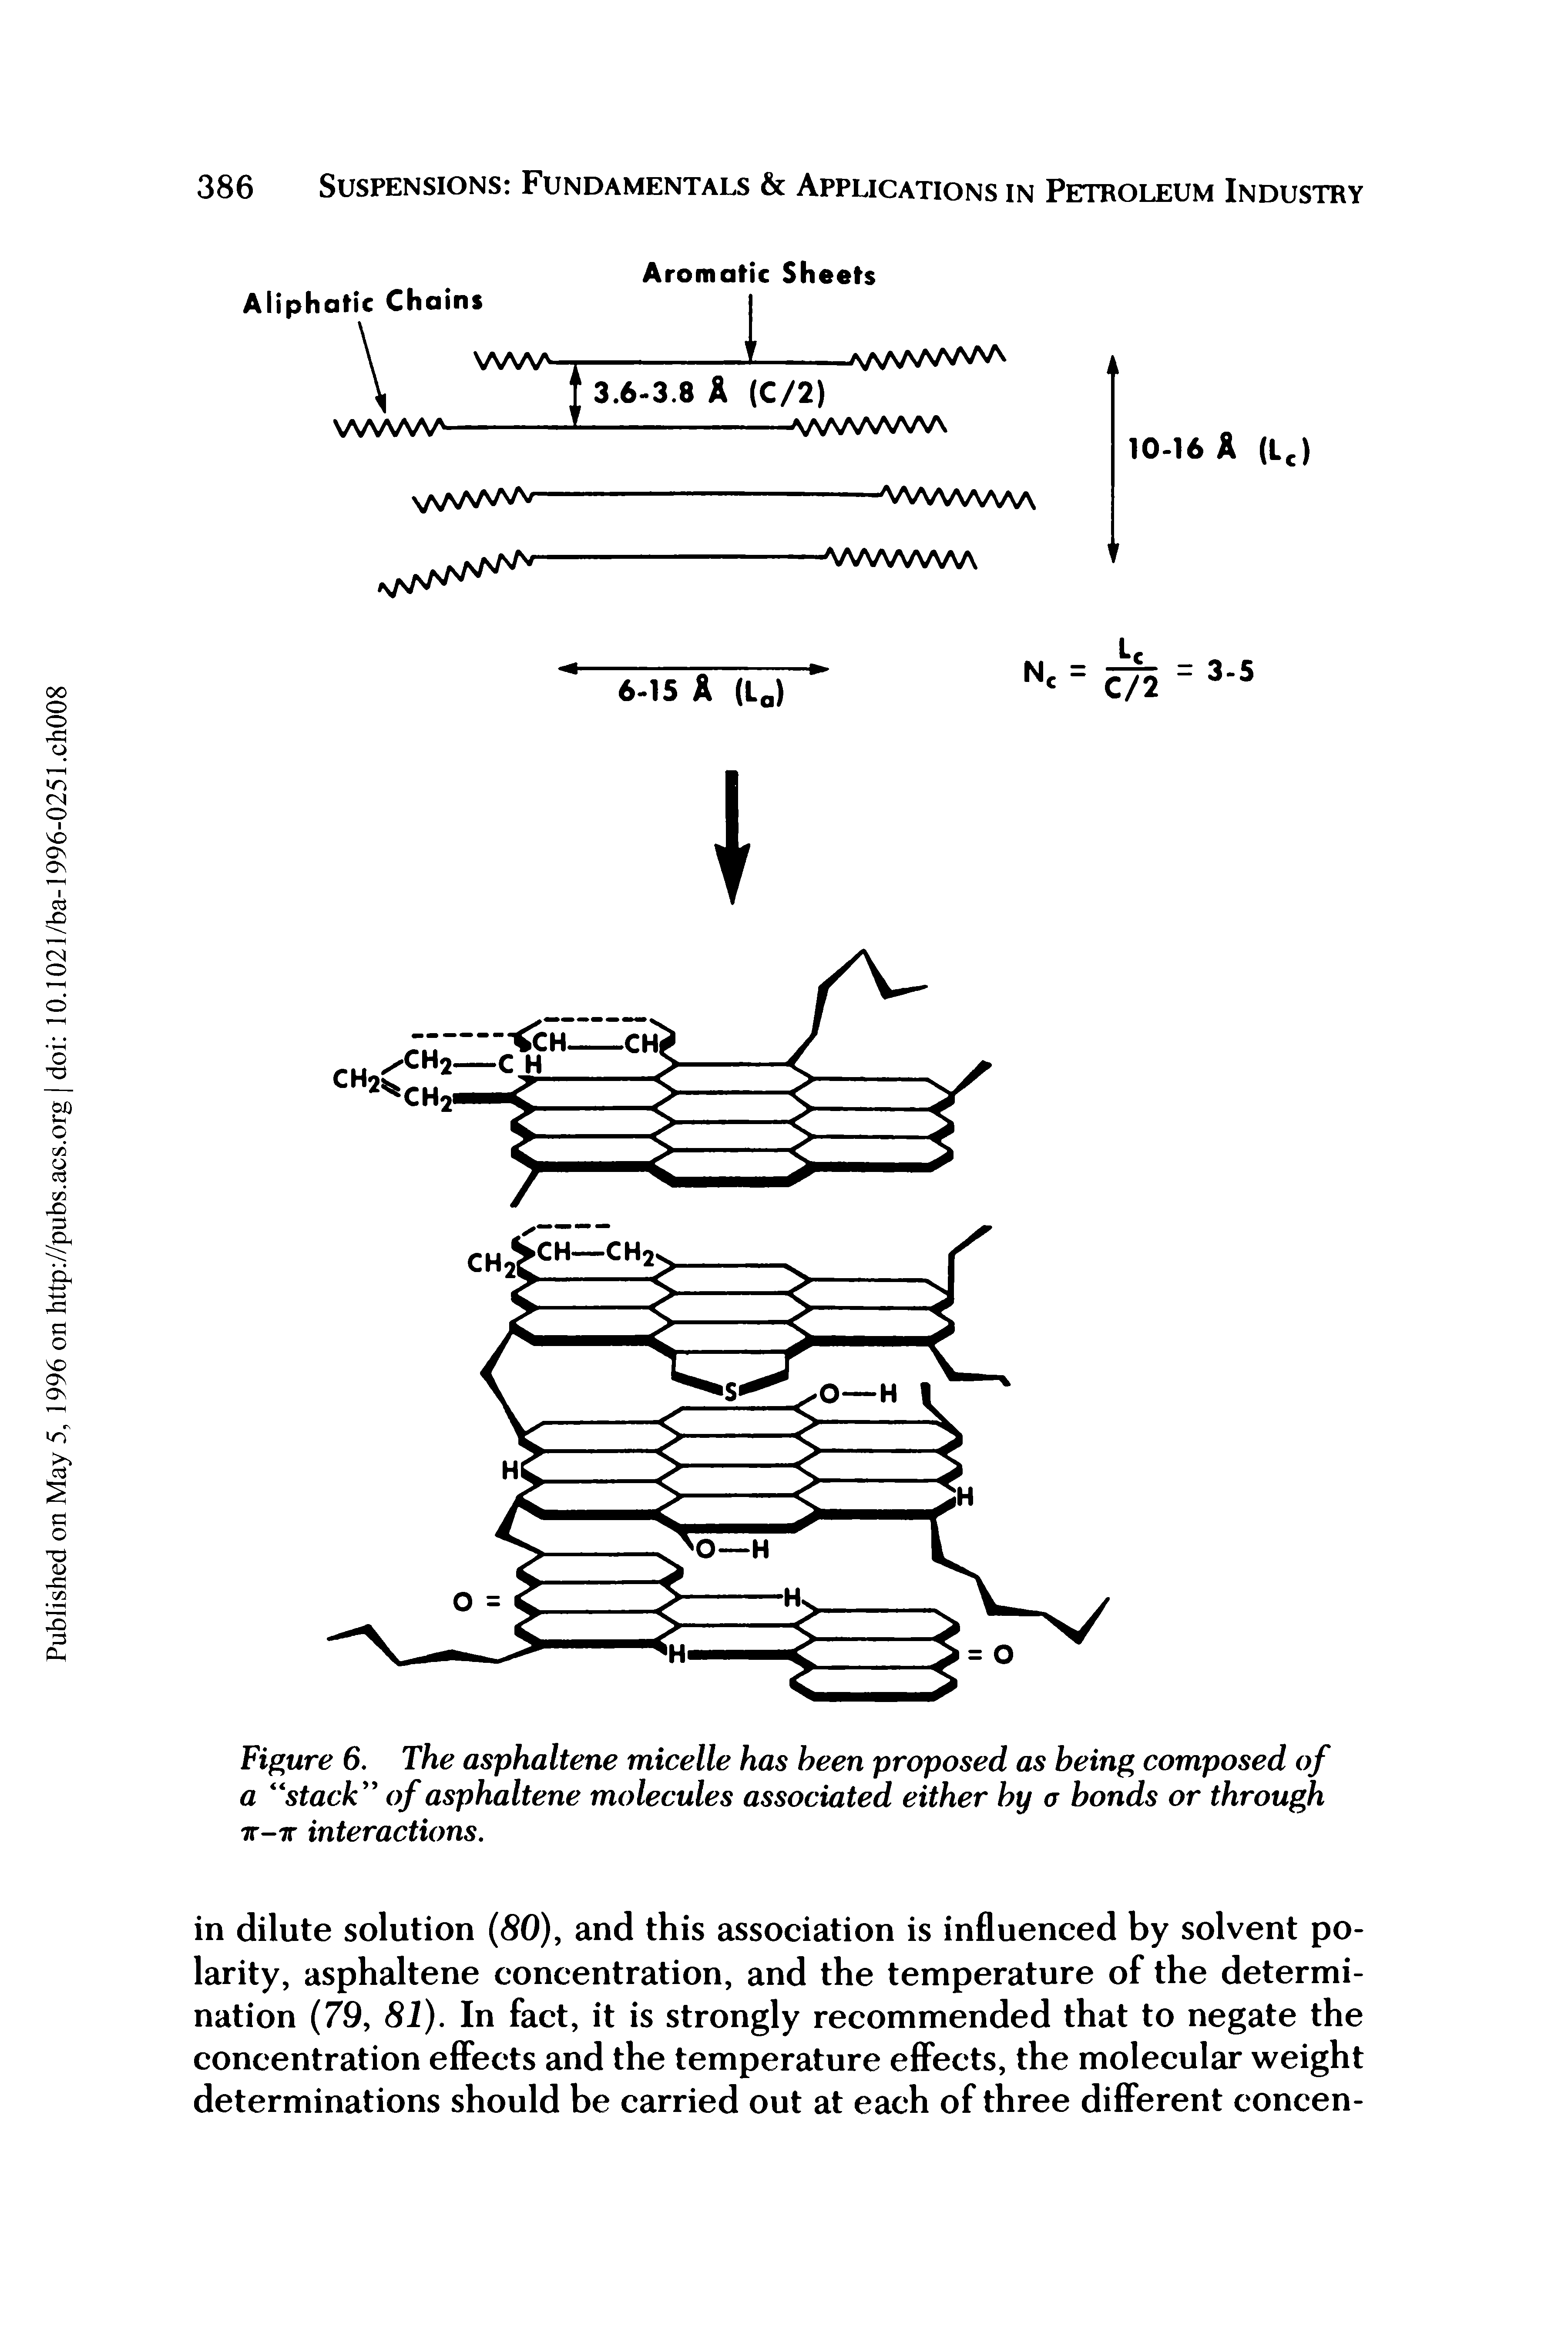 Figure 6. The asphaltene micelle has been proposed as being composed of a stack of asphaltene molecules associated either by a bonds or through 7r-7r interactions.